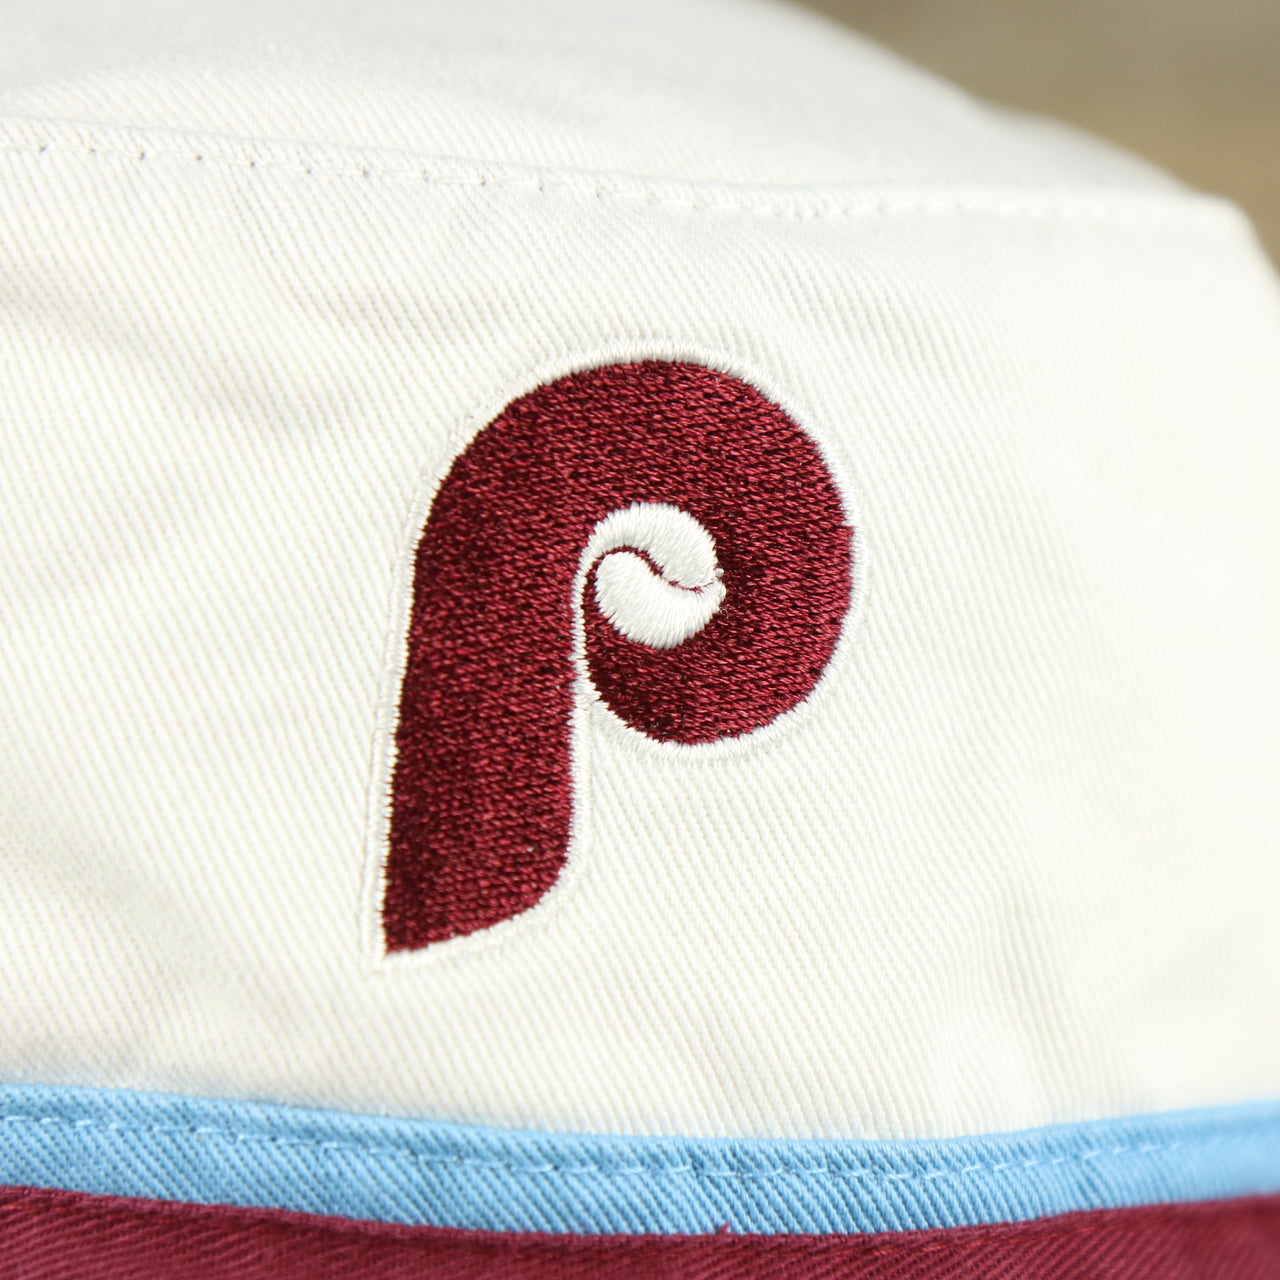 The Vintage Phillies Logo on the Cooperstown Philadelphia Phillies Striped Bucket Hat | White Bucket Hat